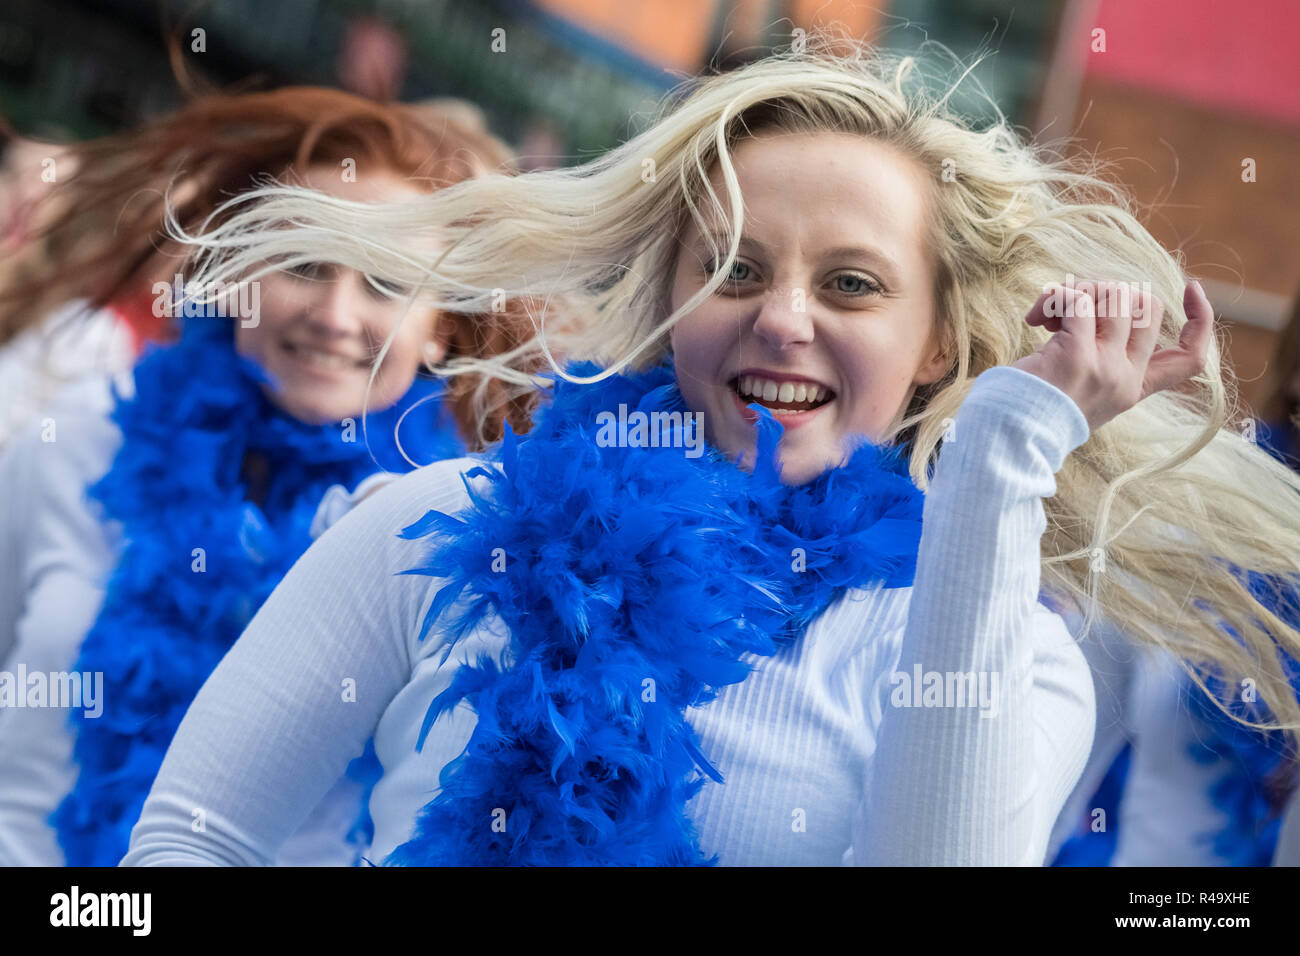 London, UK. 26th Nov 2018. 324 dancers in Mamma Mia! Here We Go Again inspired outfits break the world's largest disco dance record. Credit: Guy Corbishley/Alamy Live News Stock Photo